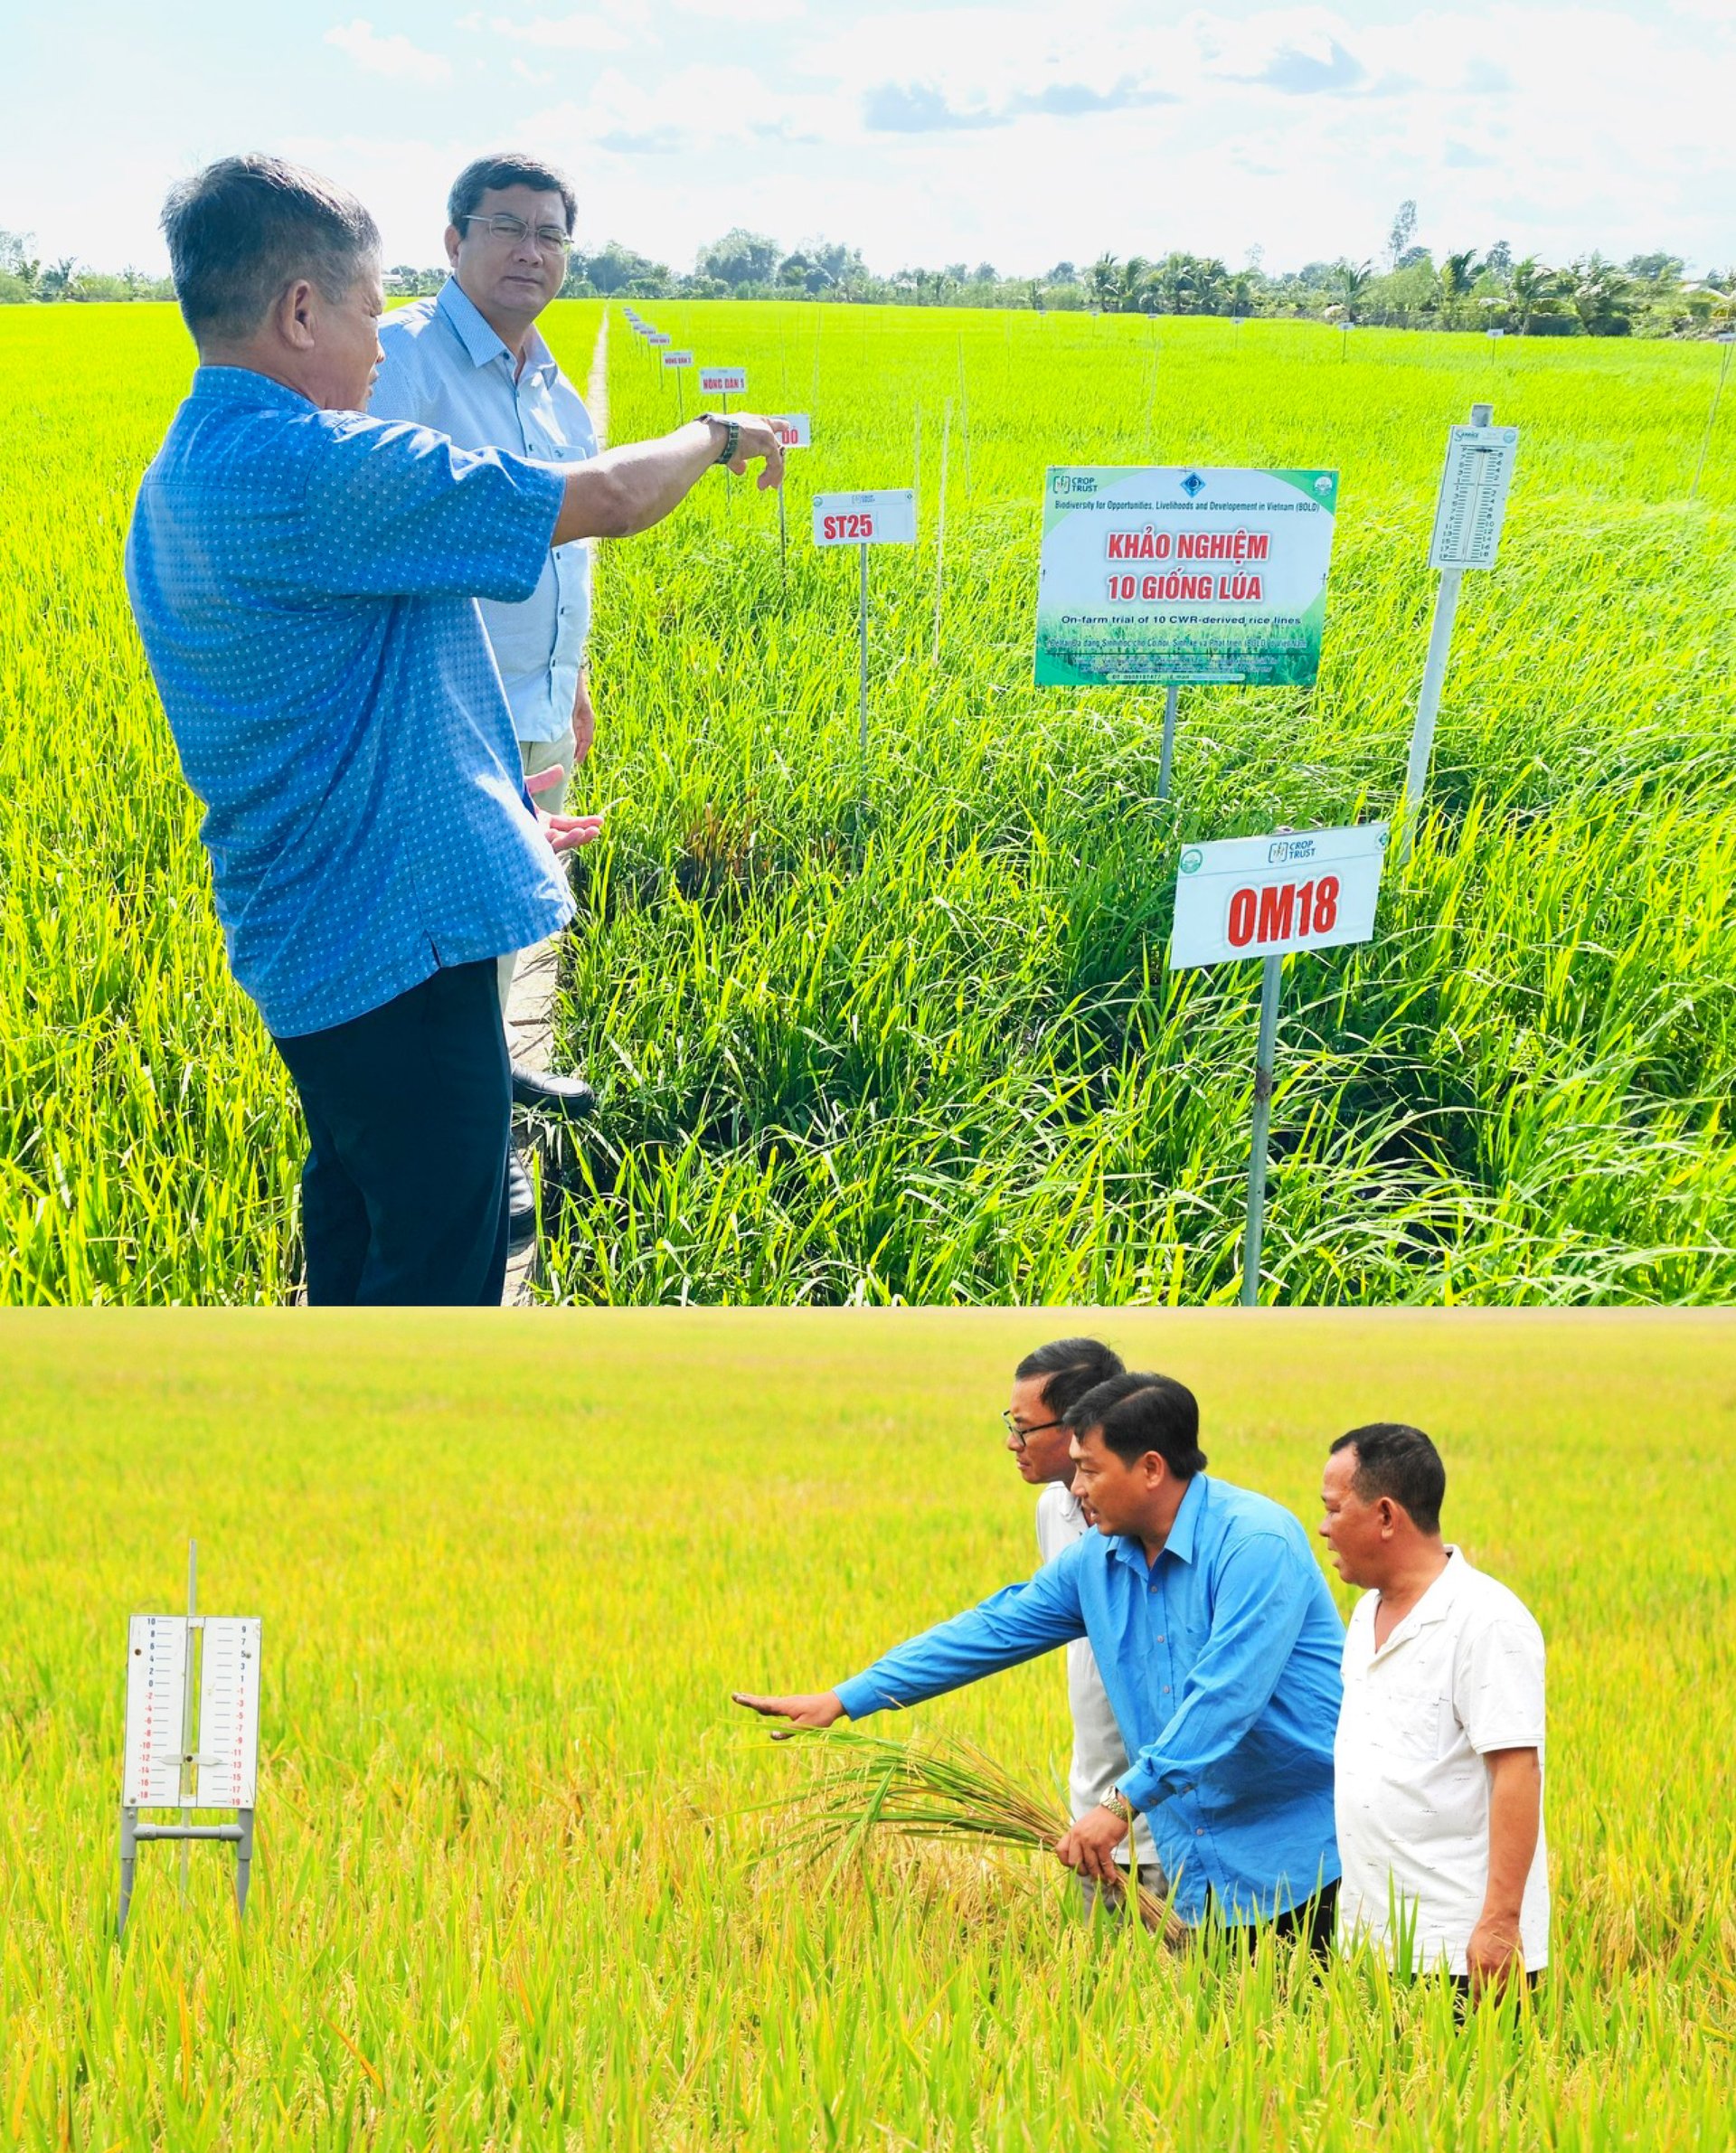 During the GR period, domestic rice production increased continuously at high or low levels depending on state policy, from 8.4 million tons in 1968 to 38.9 million tons in 2009 and 44 million tons in 2018.